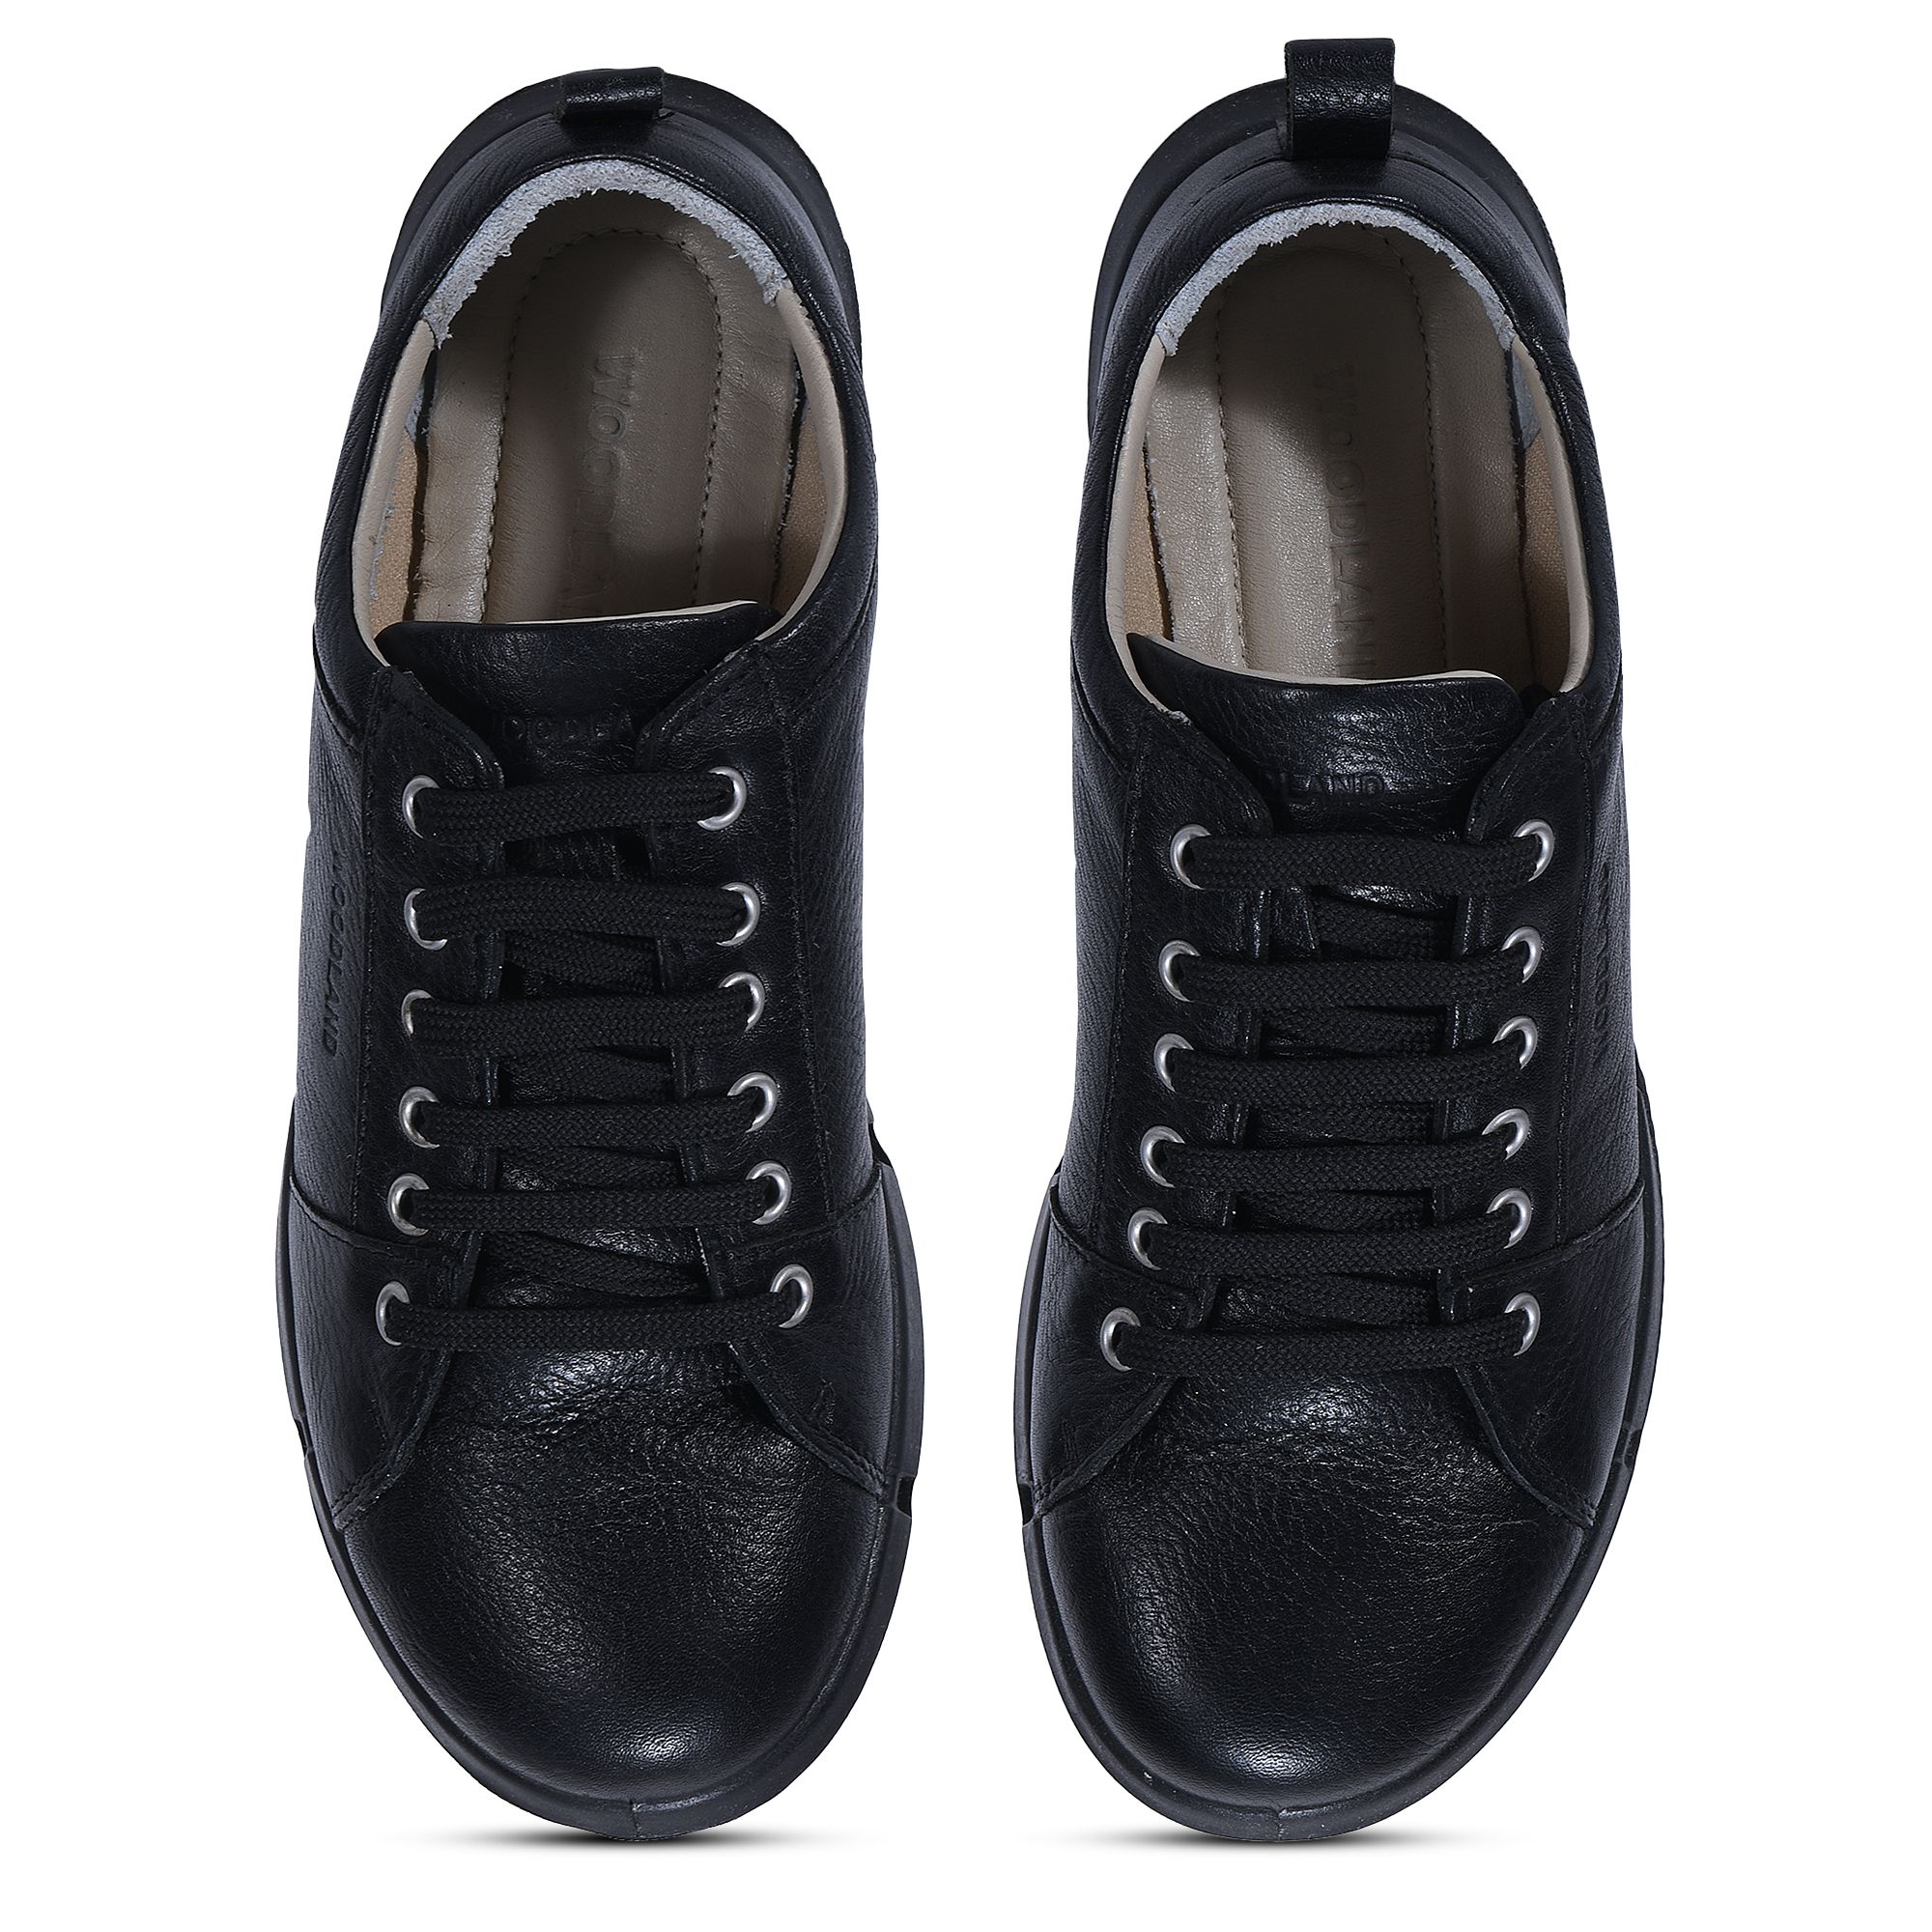 Woodland black casual sneakers